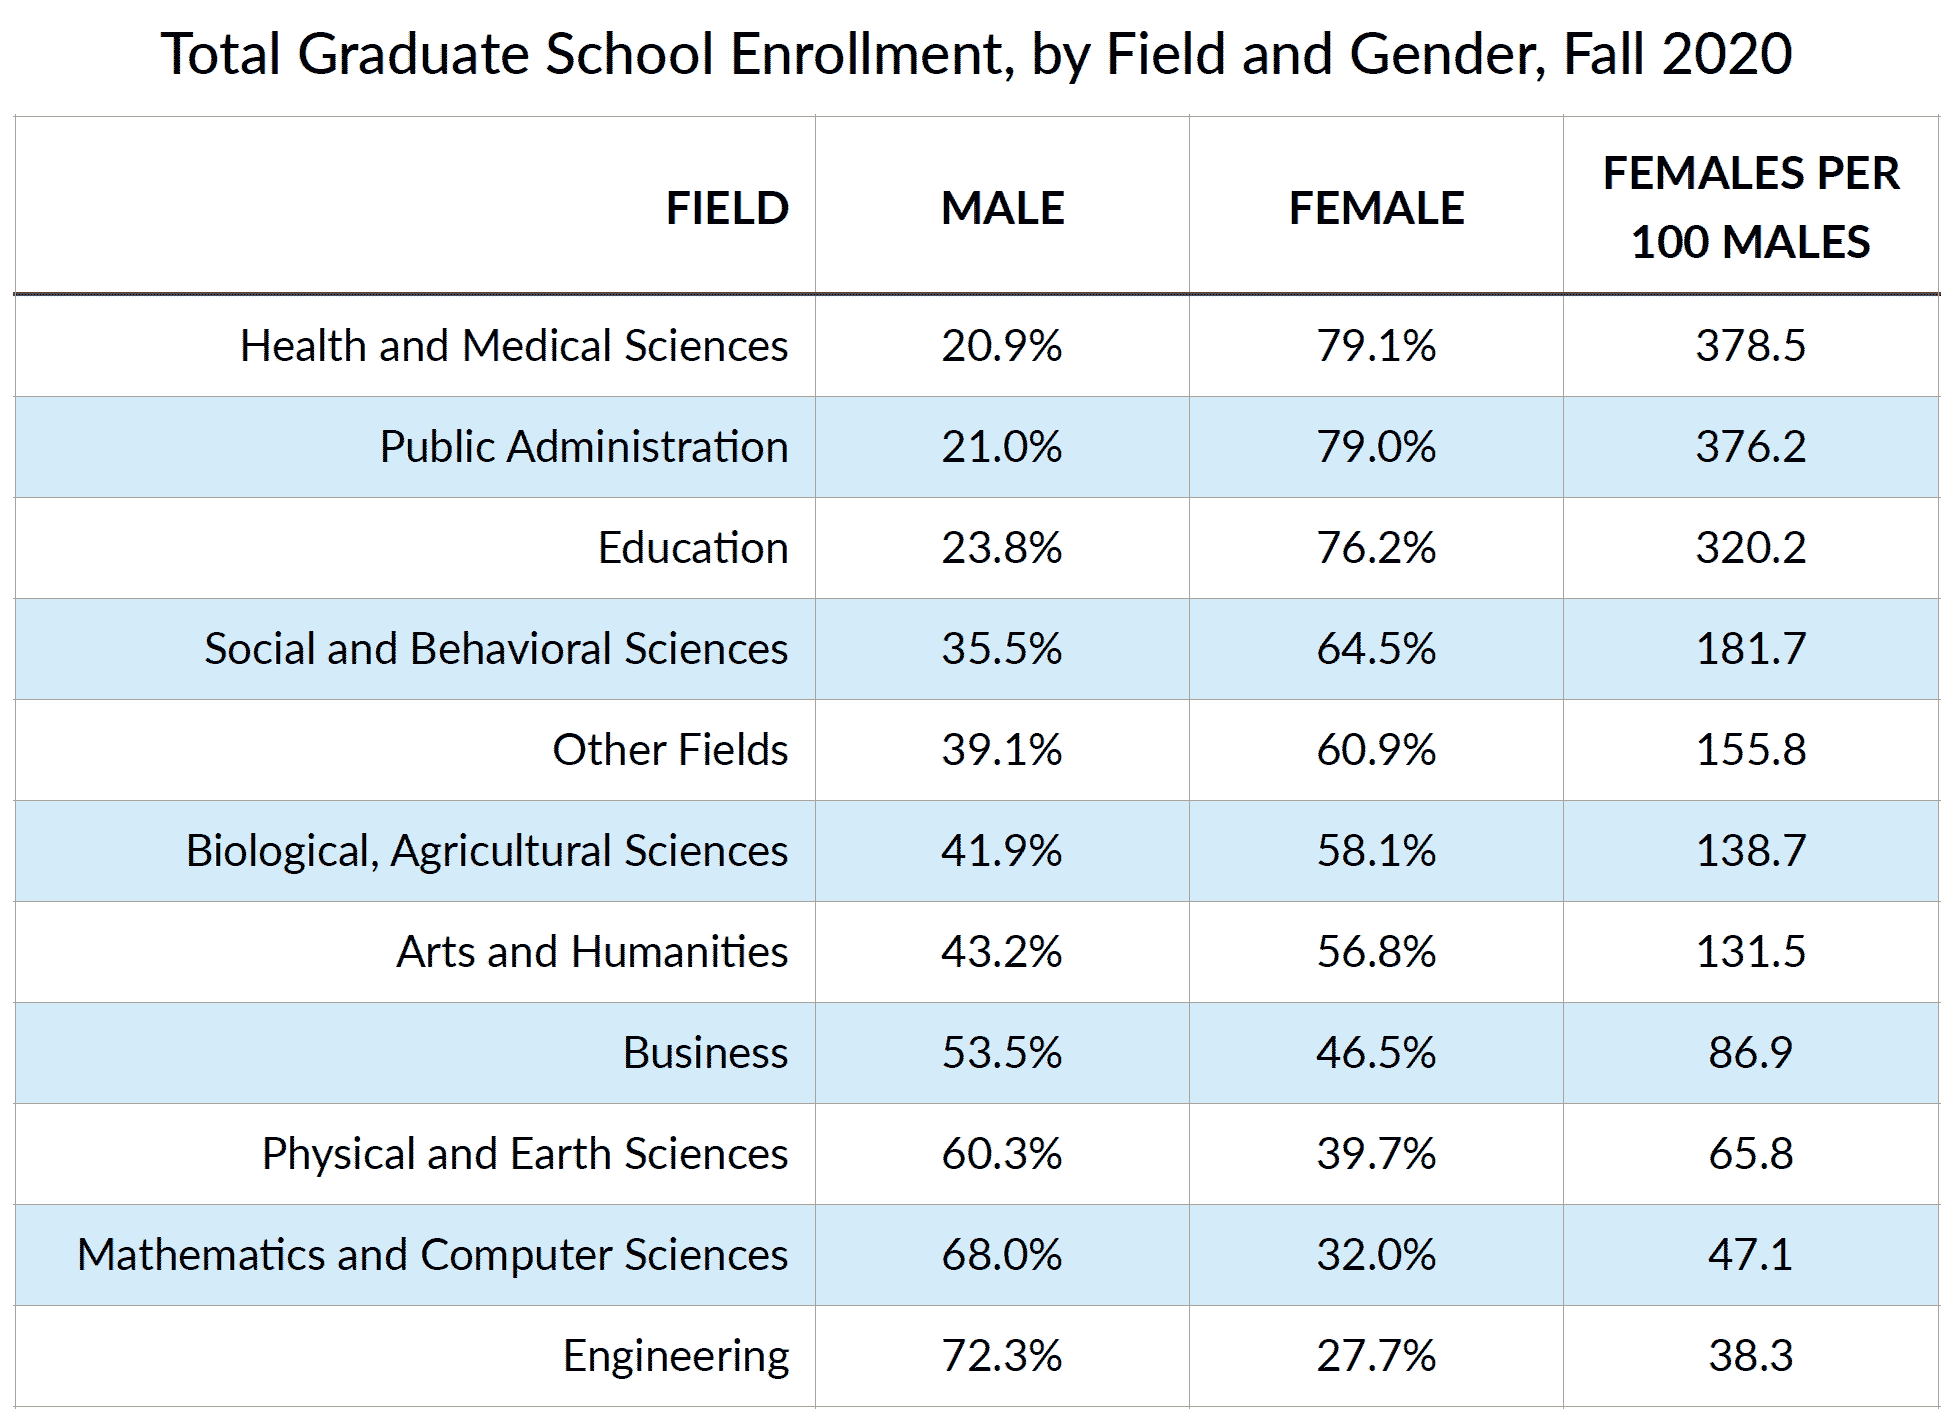 Total Graduate School Enrollment, by Field and Gender, Fall 2020